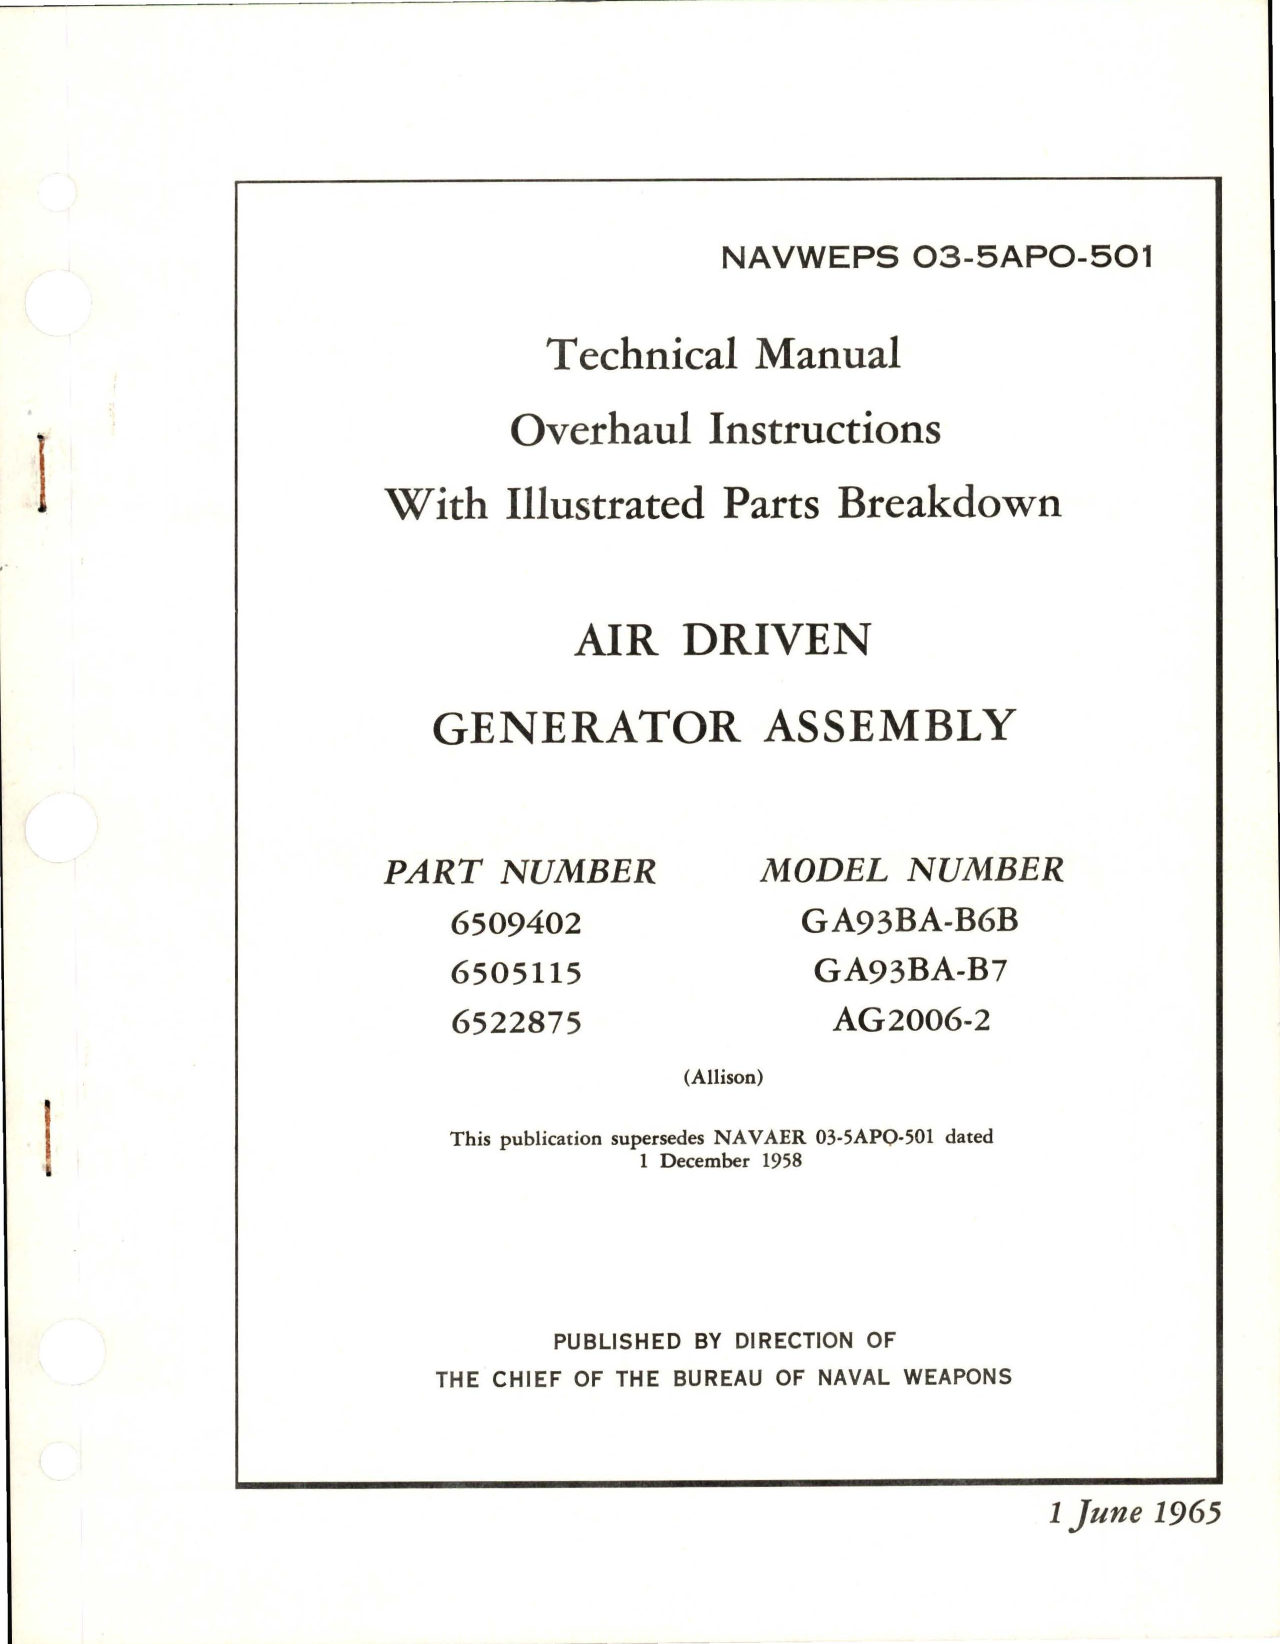 Sample page 1 from AirCorps Library document: Overhaul Instructions with Illustrated Parts Breakdown for Air Driven Generator Assembly - Parts 6509402, 6505115, and 6522875